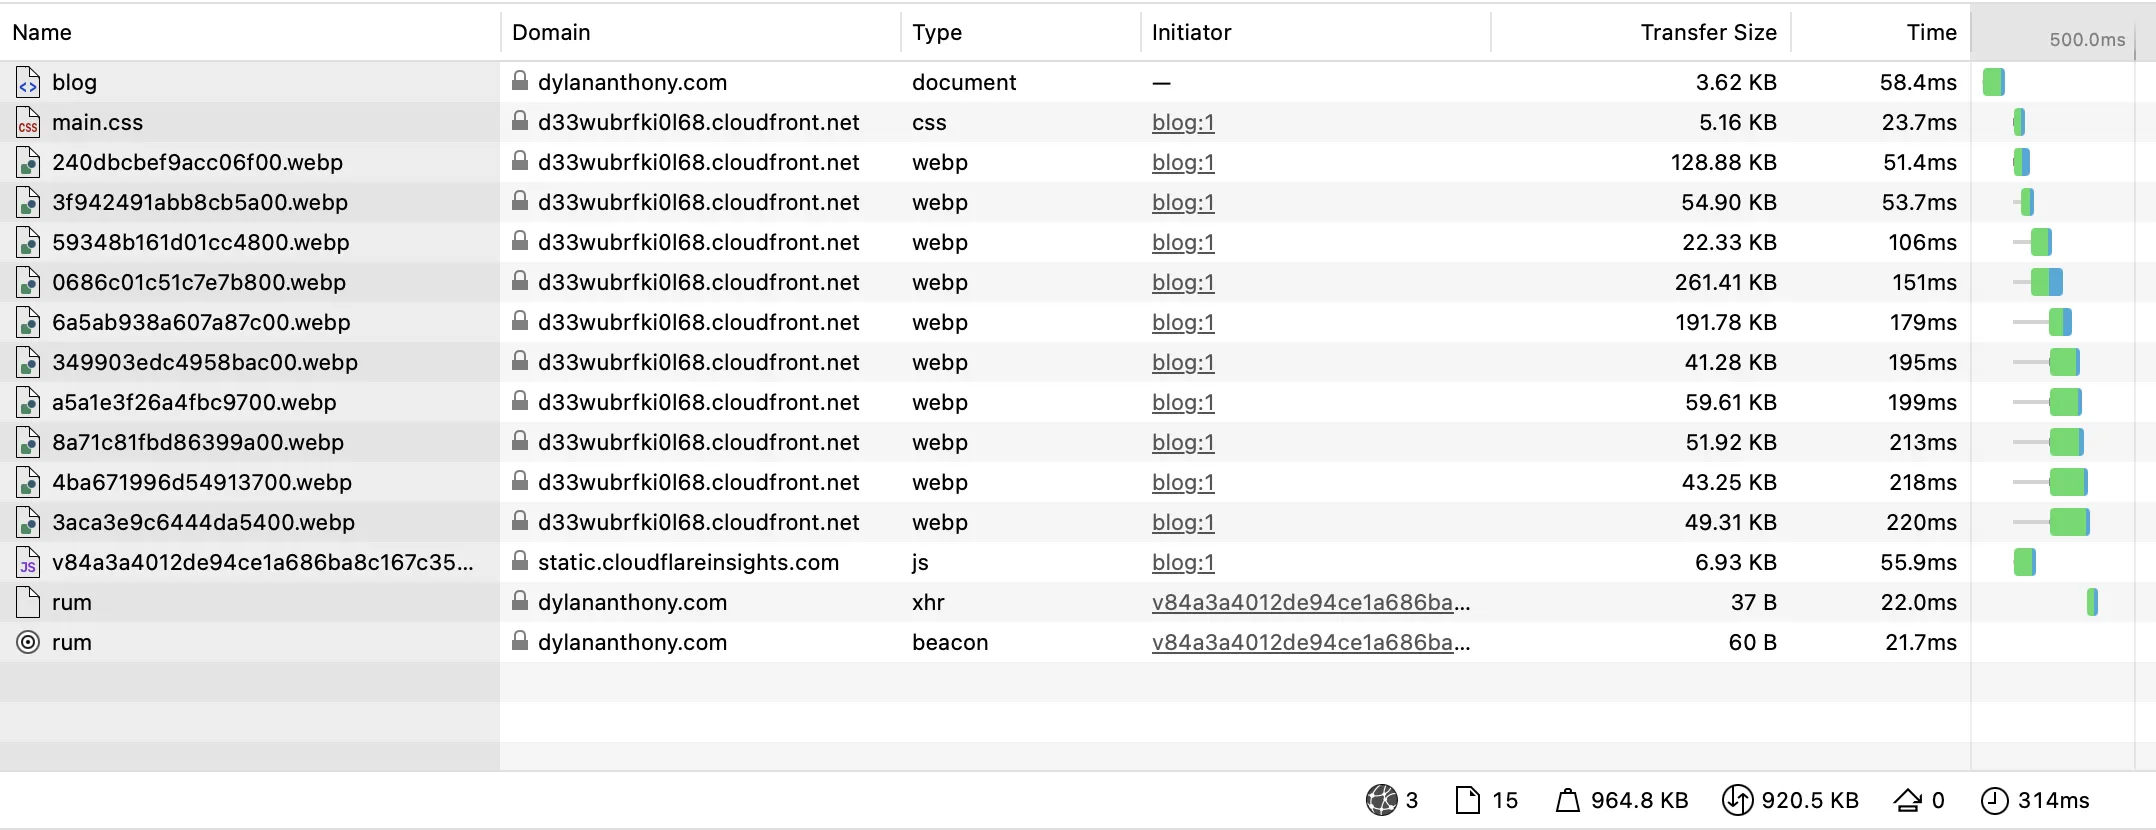 
A screenshot of the network view in Safari. There are 15 requests, totaling 920.5KB transferred.
